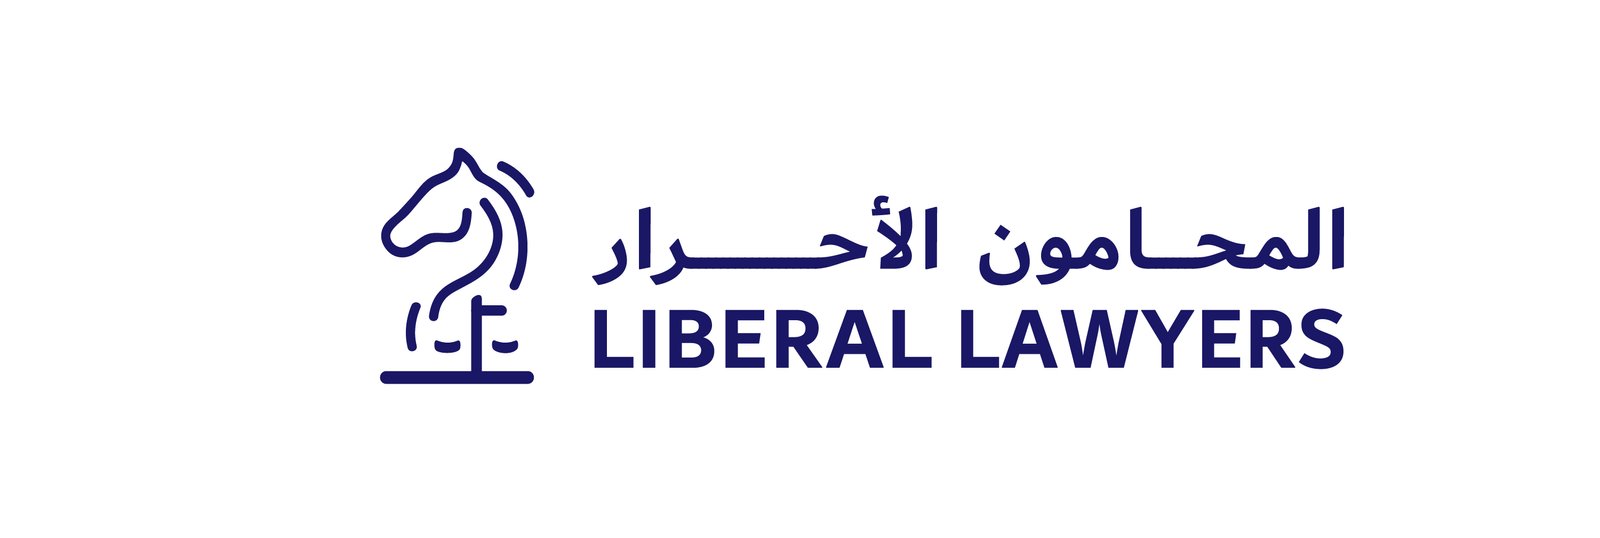 LIBERALS LAWYERS LEGAL CONSULTANTS AND LAWYERS